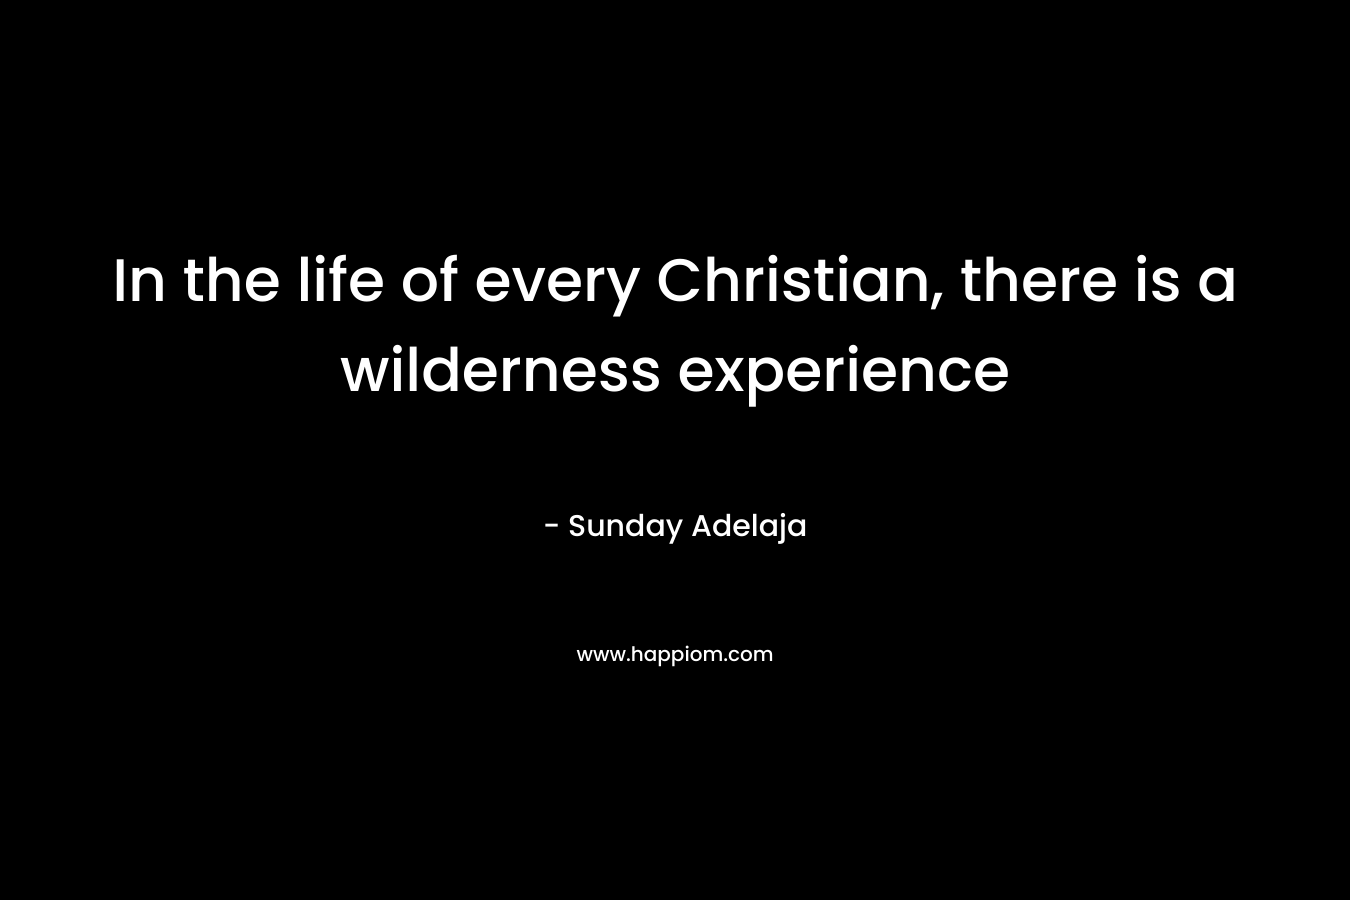 In the life of every Christian, there is a wilderness experience